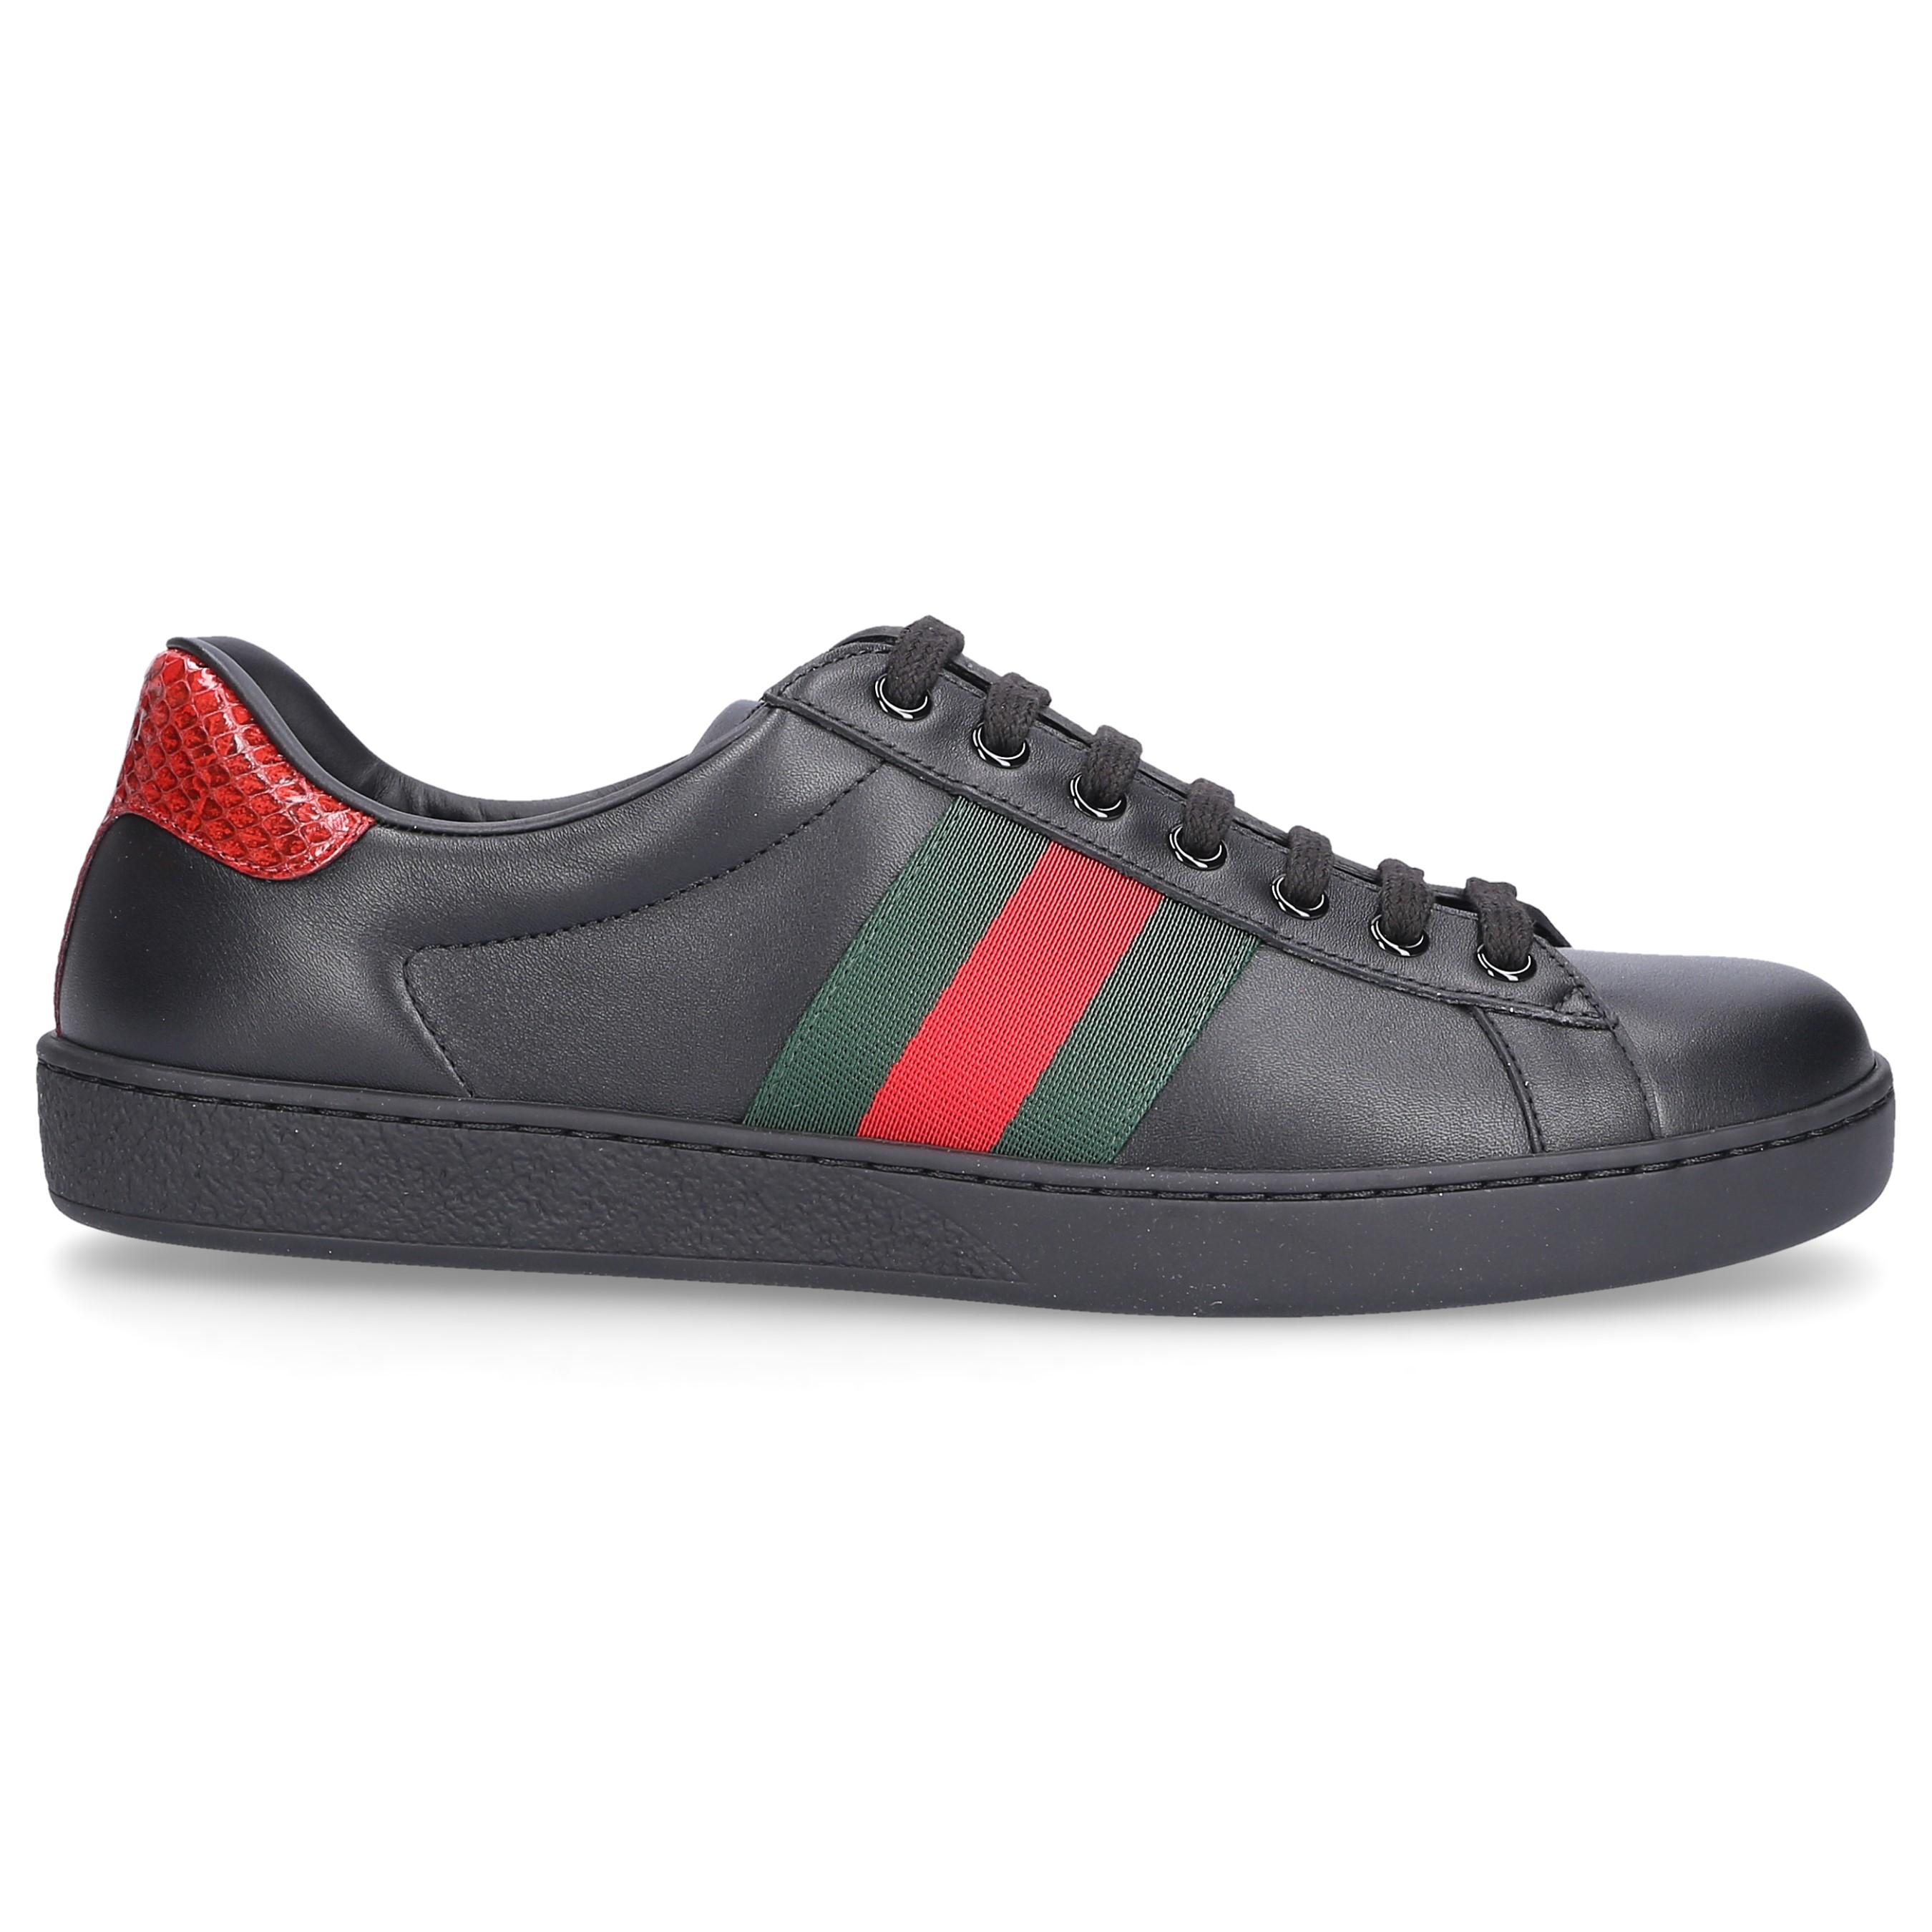 Gucci Leather Sneakers Black New Ace for Men - Save 46% - Lyst